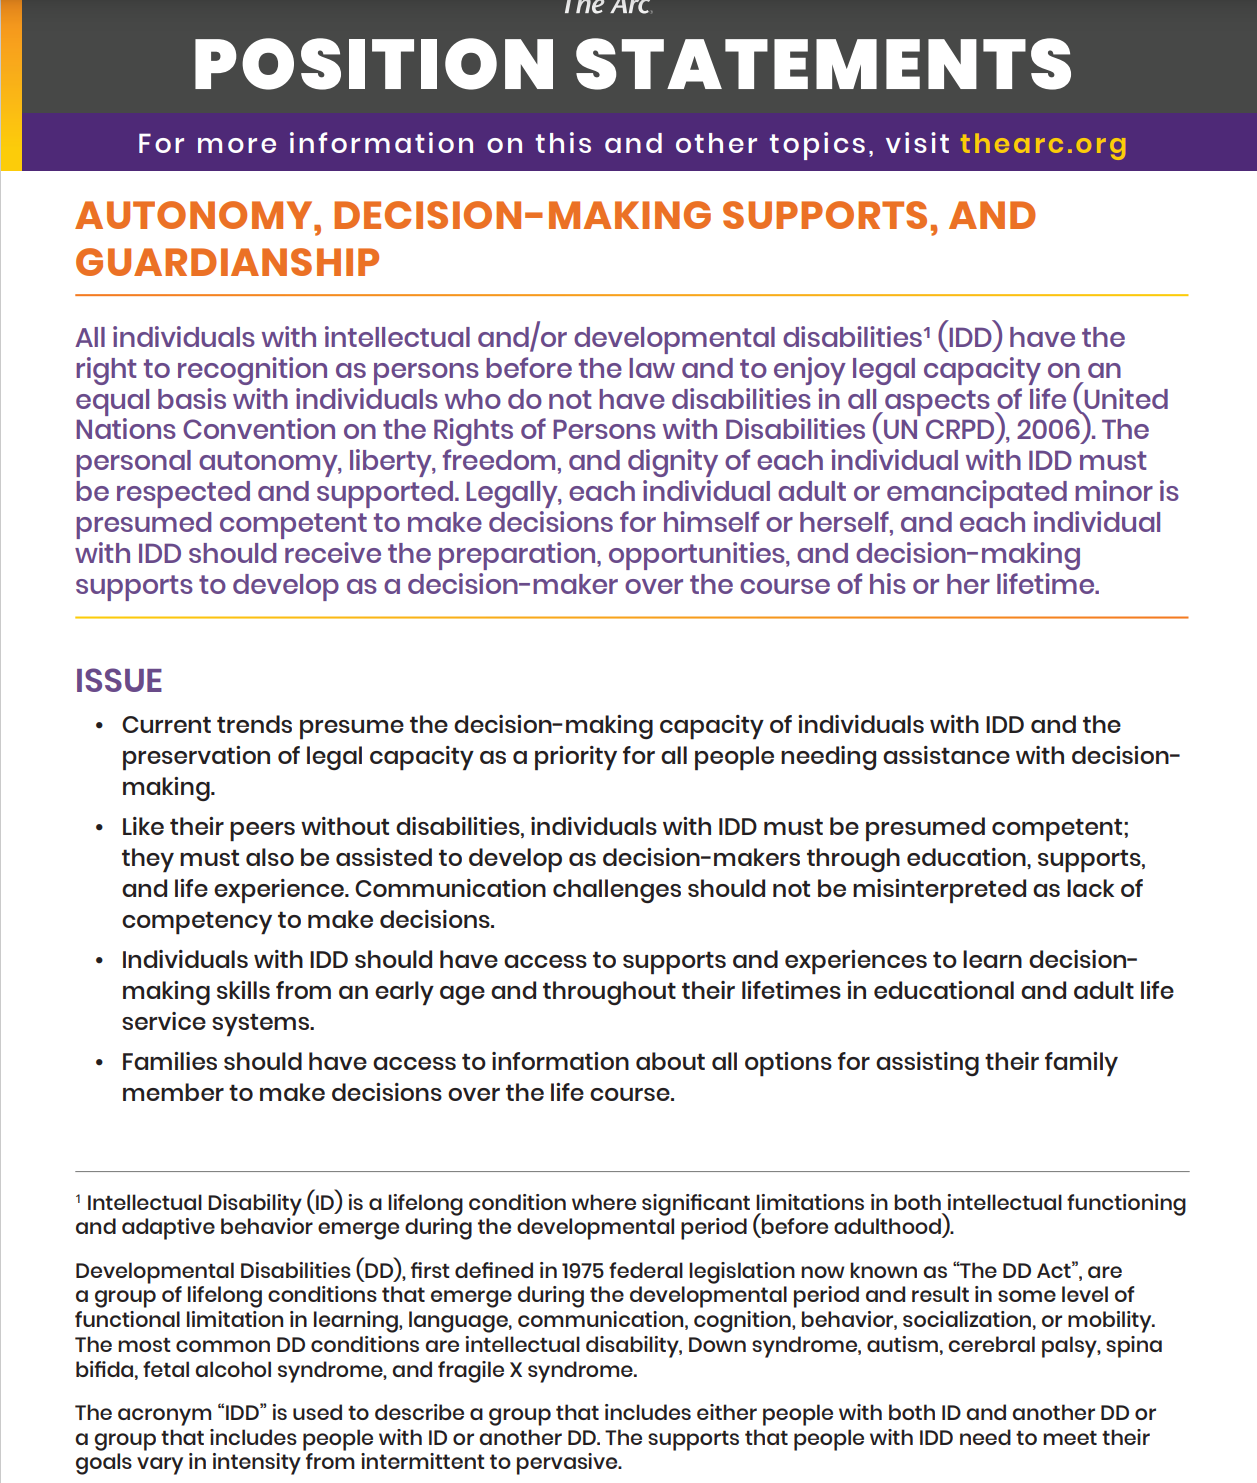 Cover art for: Position Statement: Autonomy, Decision Making Supports and Guardianship